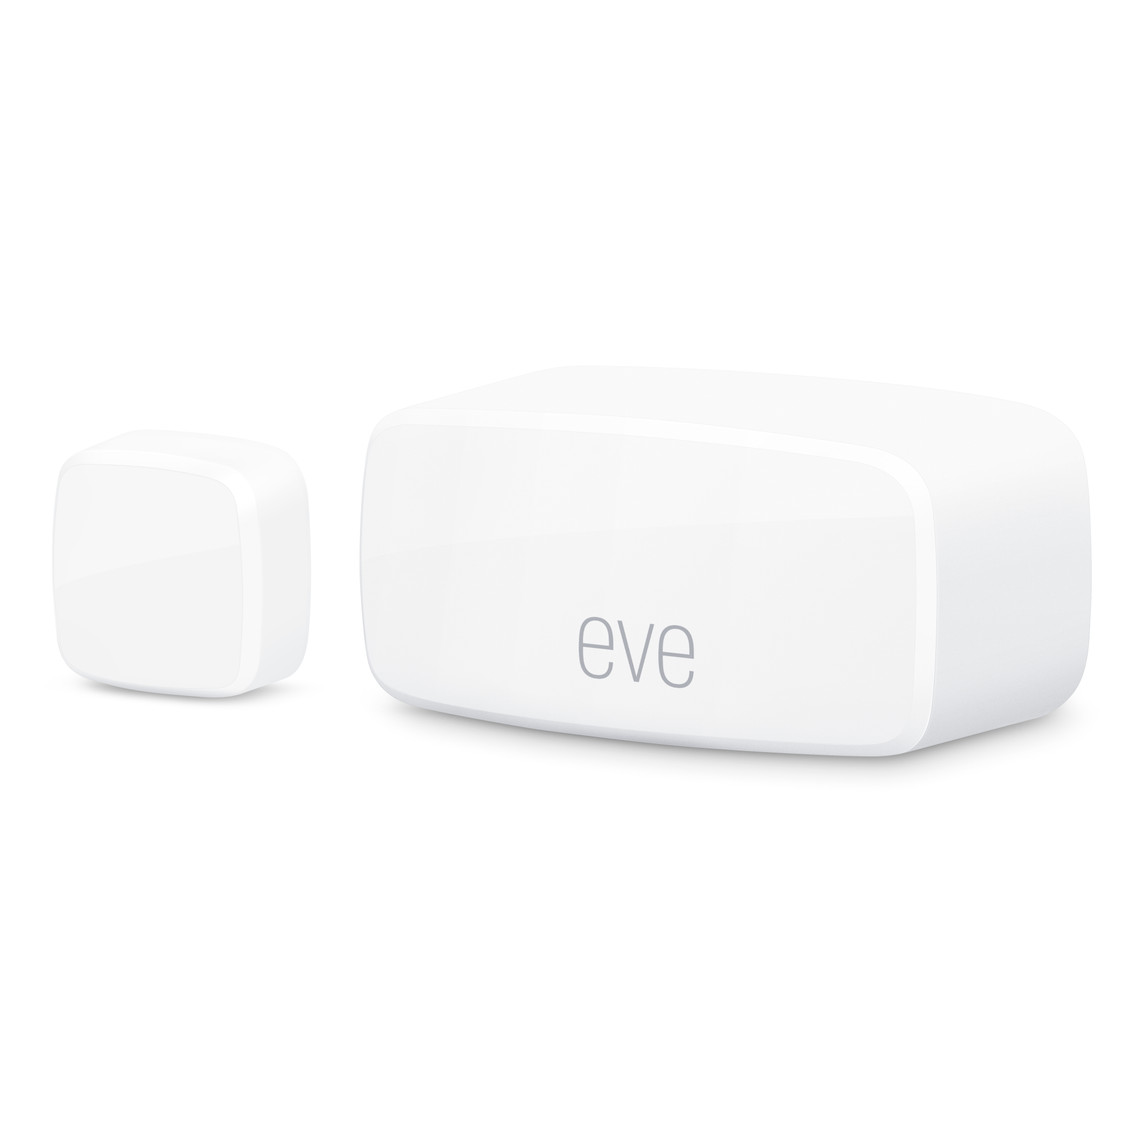 The compact Eve Wireless Contact Sensors for doors and windows, Matter Version, with Eve logo prominently featured.